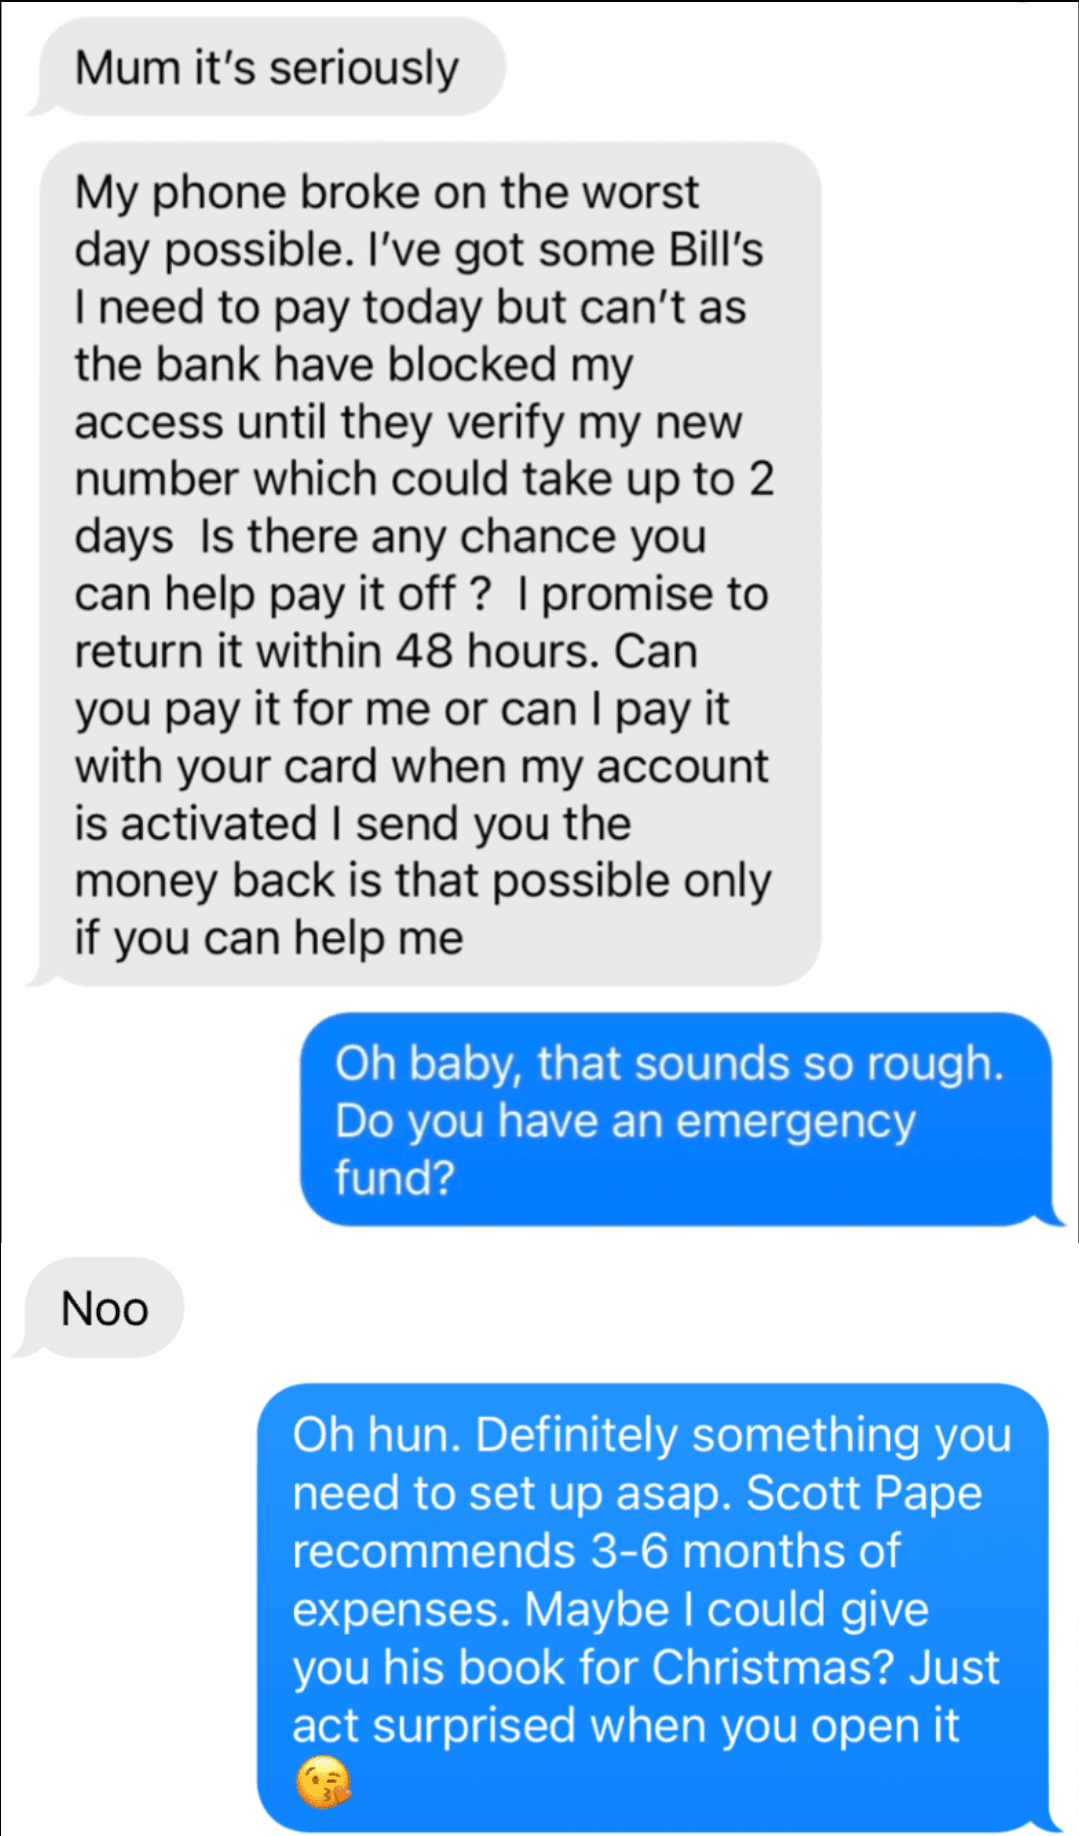 A screenshot of a message exchange between two people, one of which is a scammer.